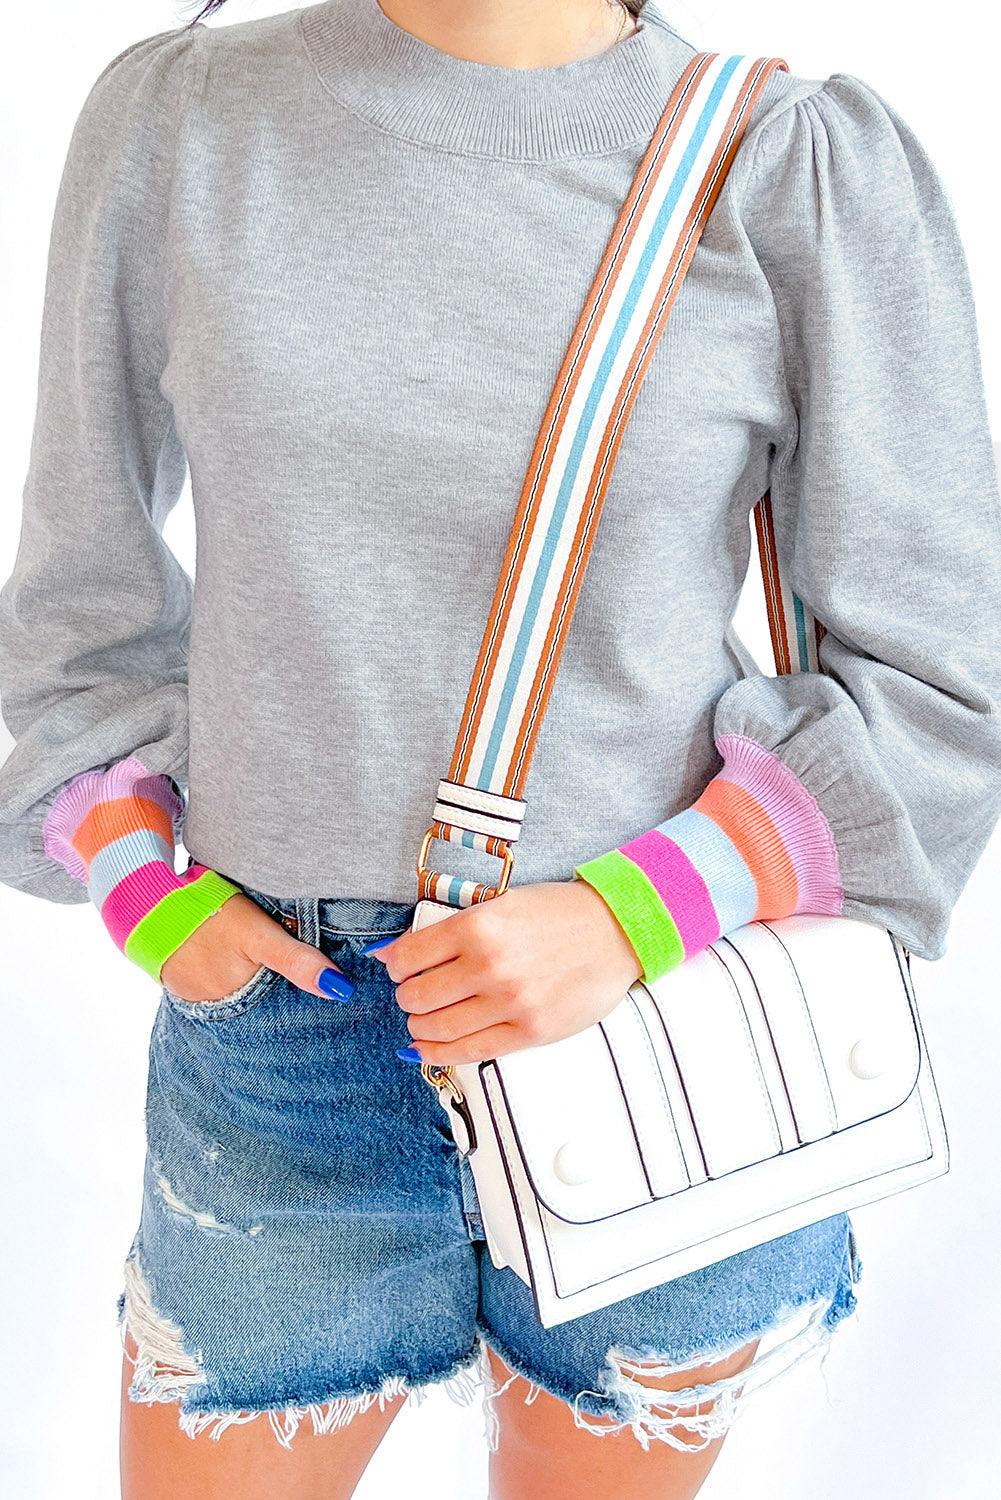 Crew Neck Colorful Striped Cuffs Puff Sleeves Sweater - L & M Kee, LLC